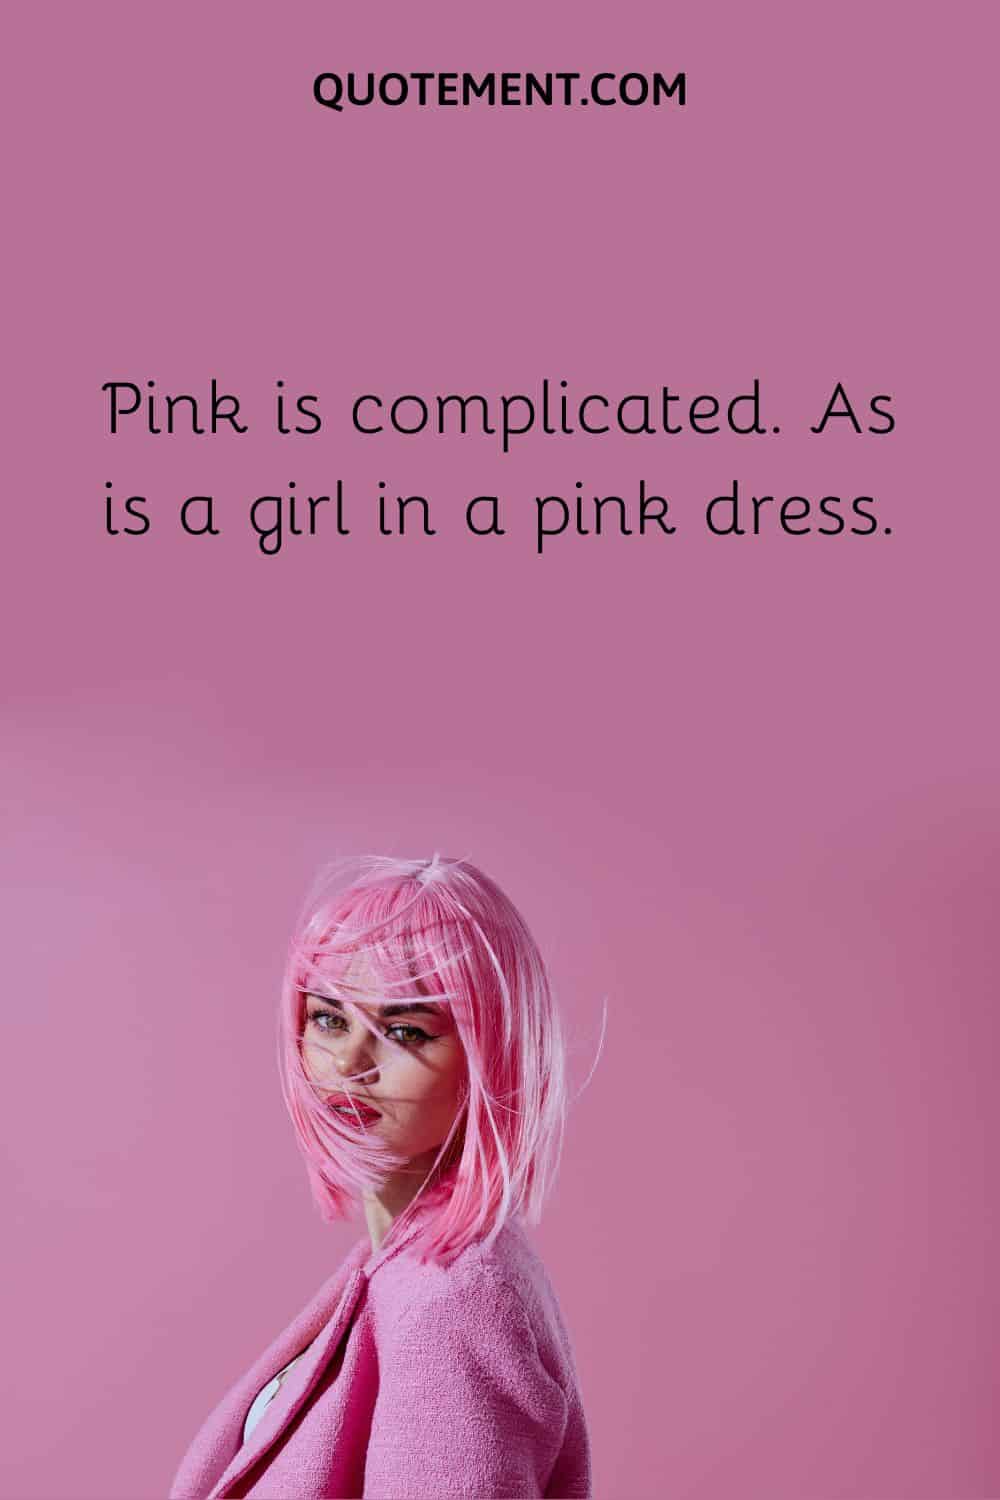 girl wearing pink representing caption for pink dress
